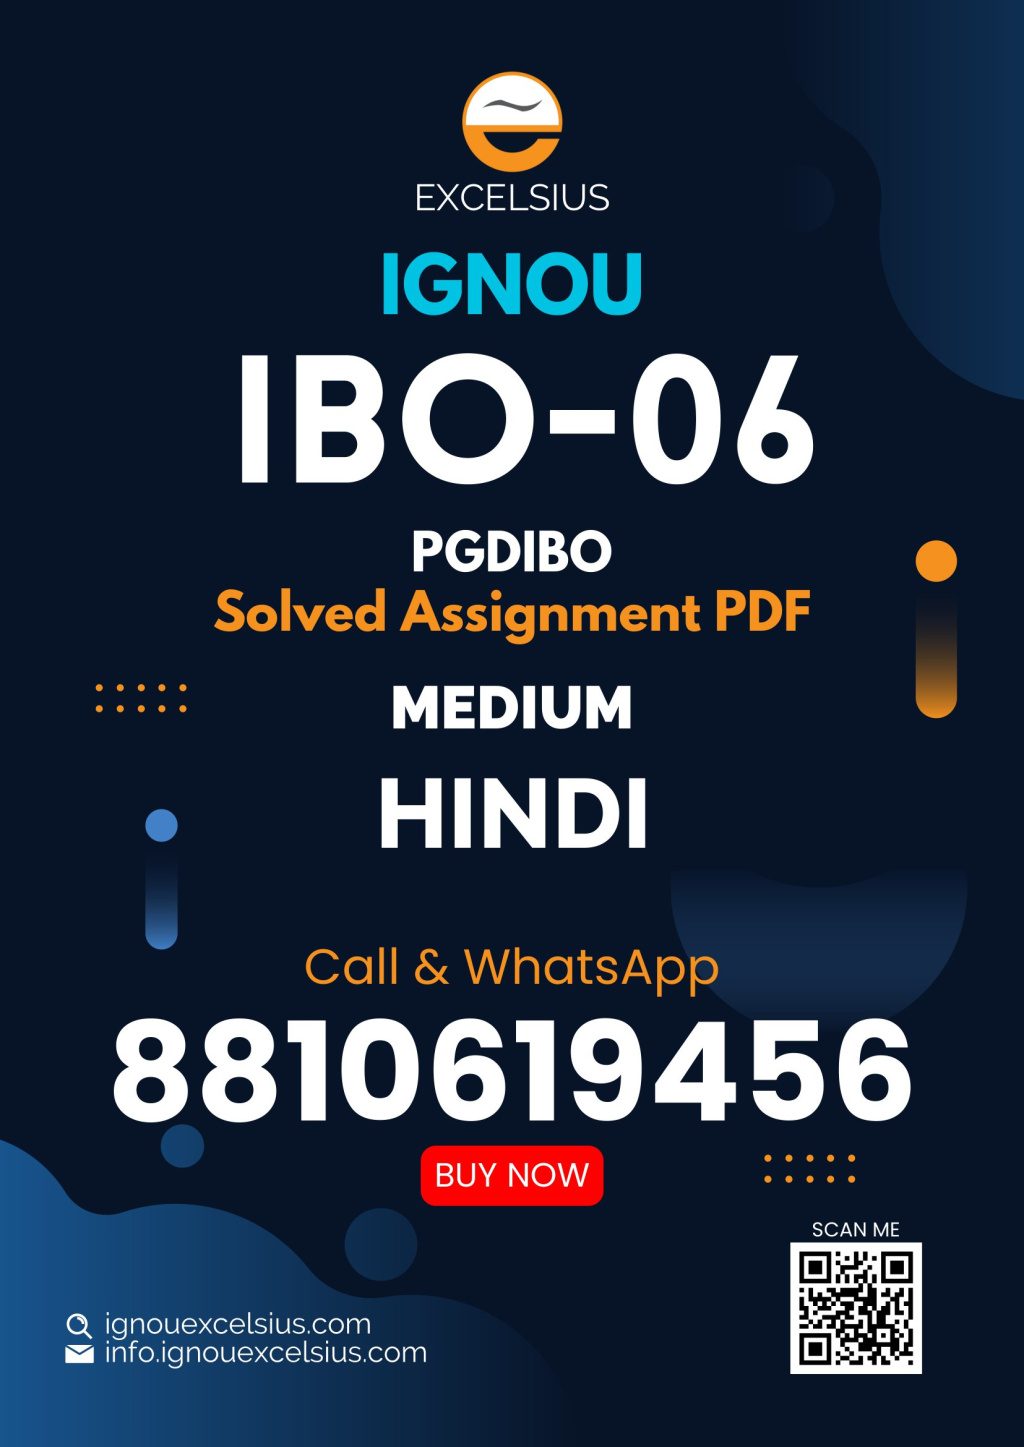 IGNOU IBO-06 (PGDIBO) - International Business Finance Latest Solved Assignment-January 2023 - July 2023